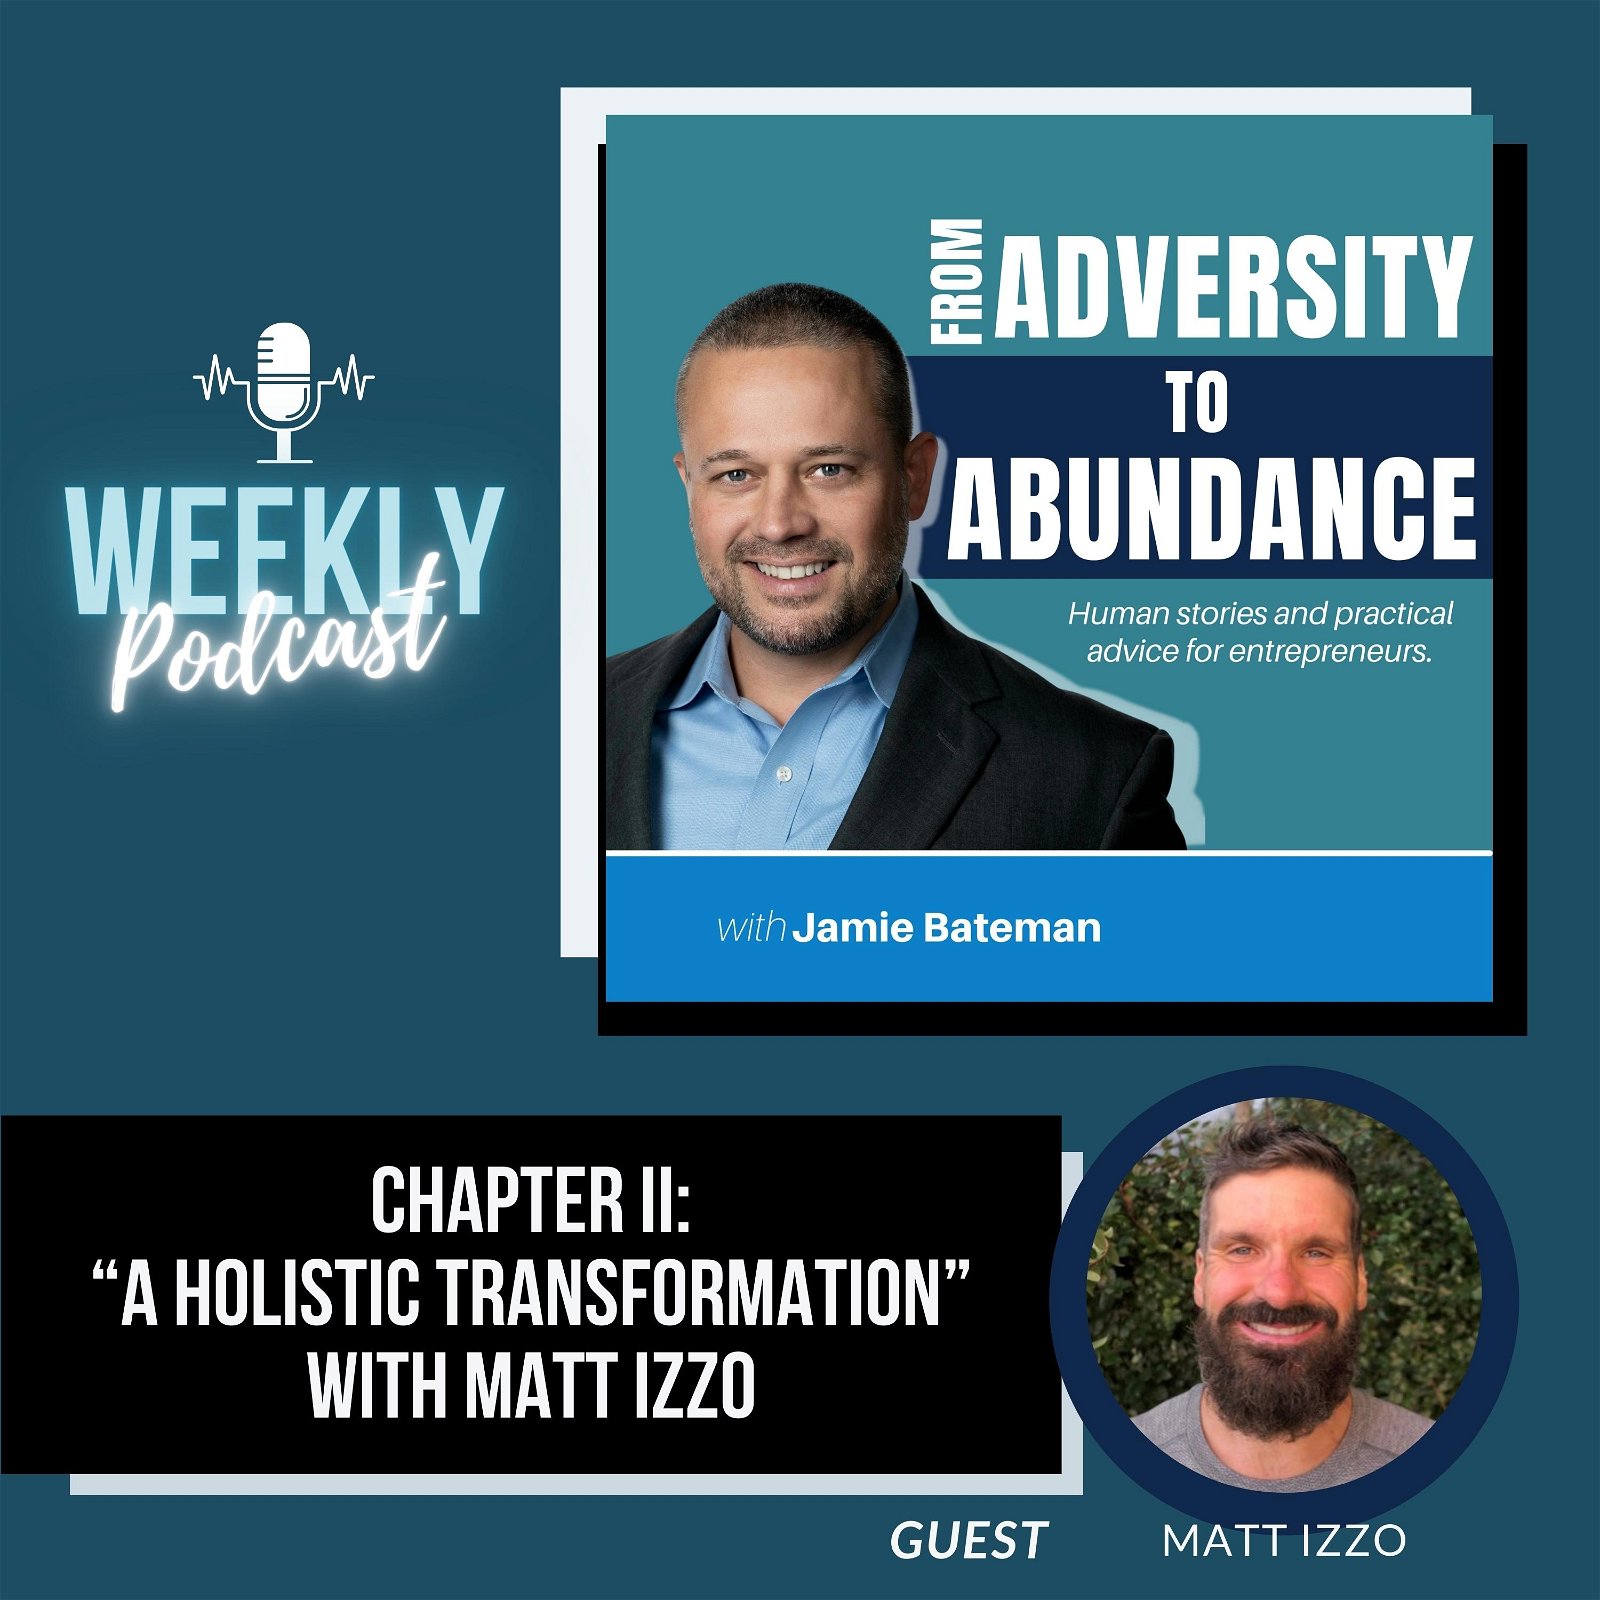 Chapter II: “A Holistic Transformation” with Matt Izzo